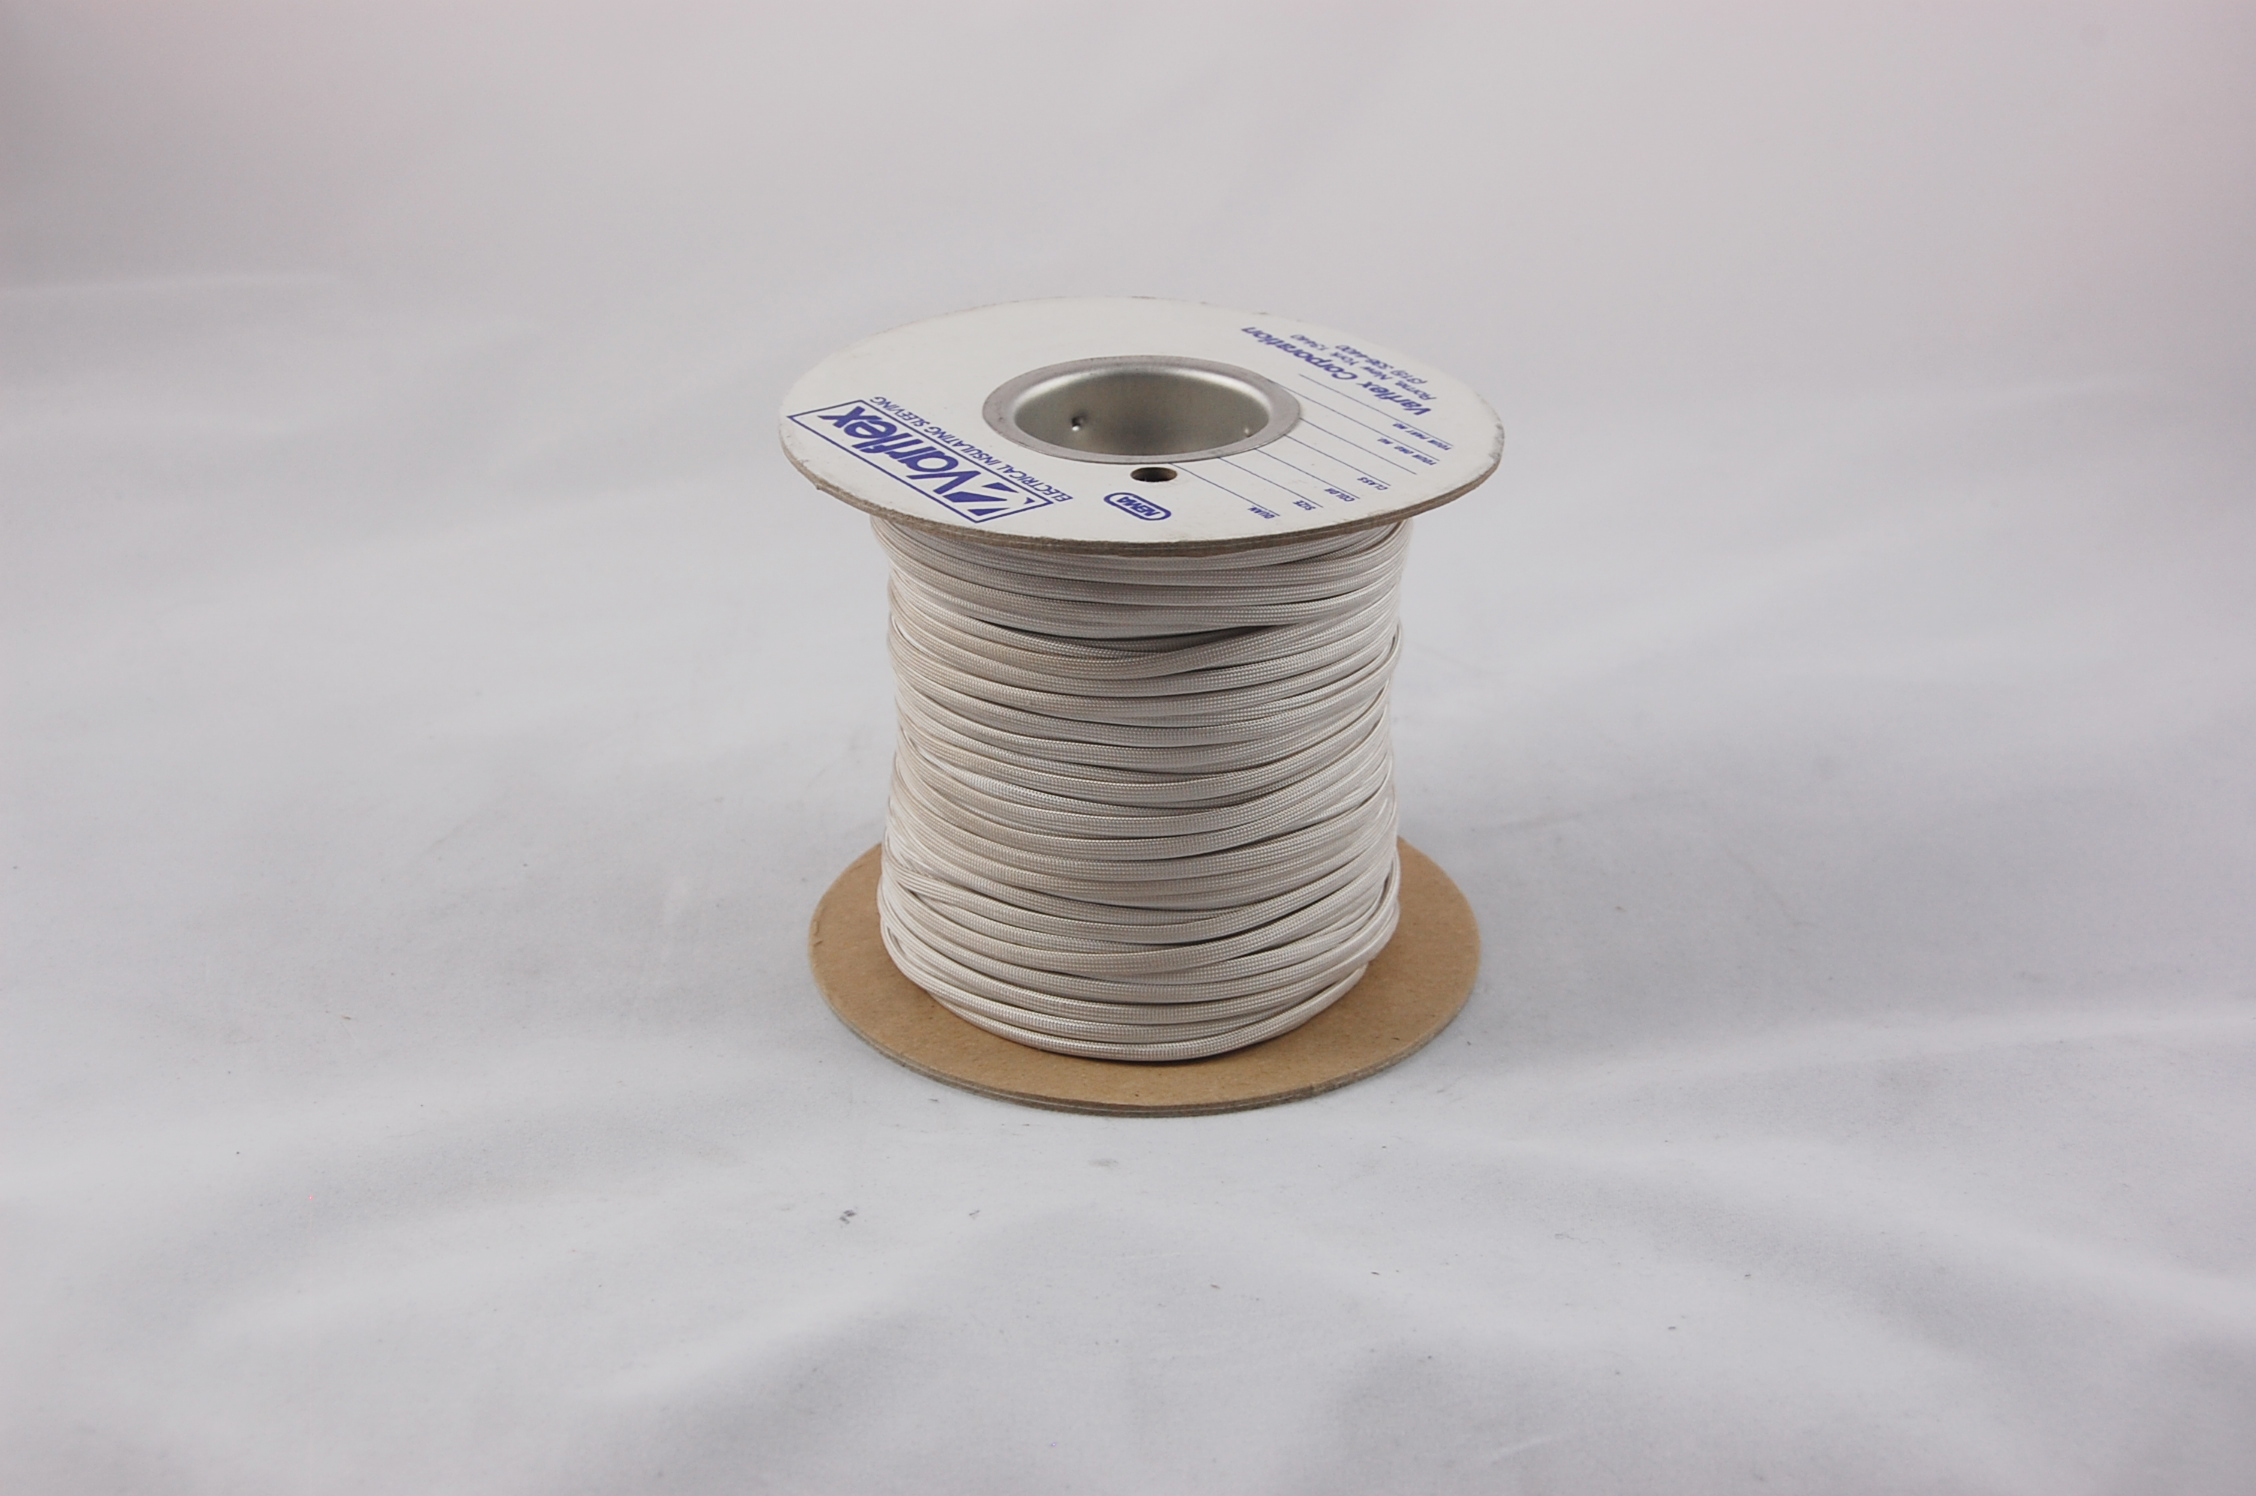 2 X 100' ROLLS SUFLEX ELECTRICAL WIRE INSULATION SLEEVING 7/16" I.D 200 FT 